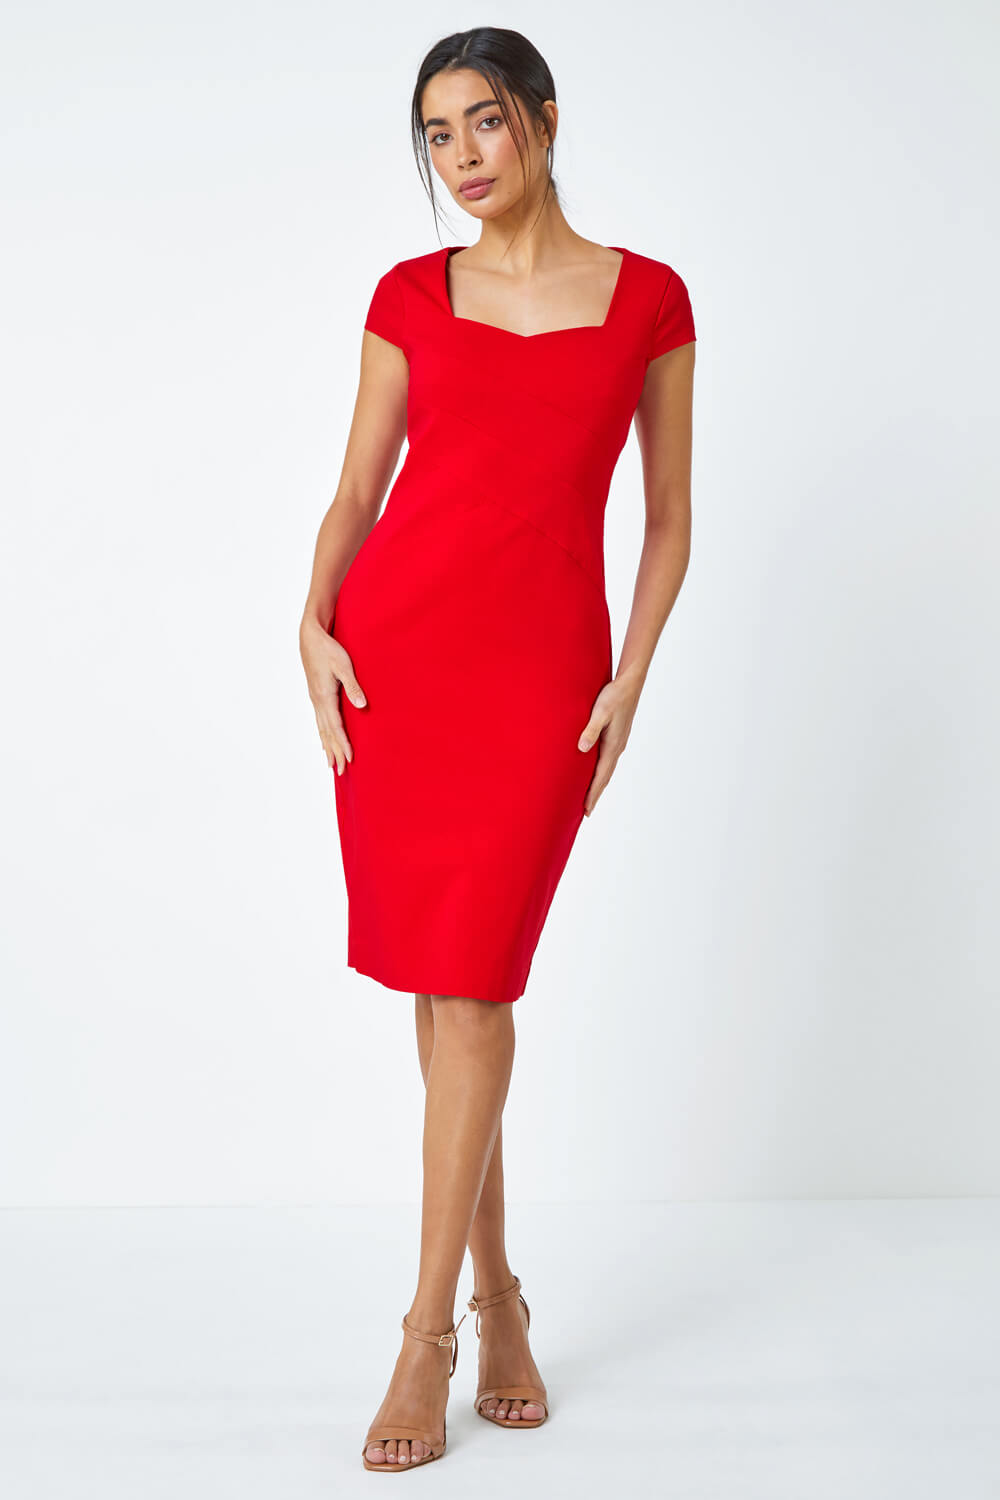 Red Sweetheart Neck Fitted Stretch Dress, Image 2 of 5